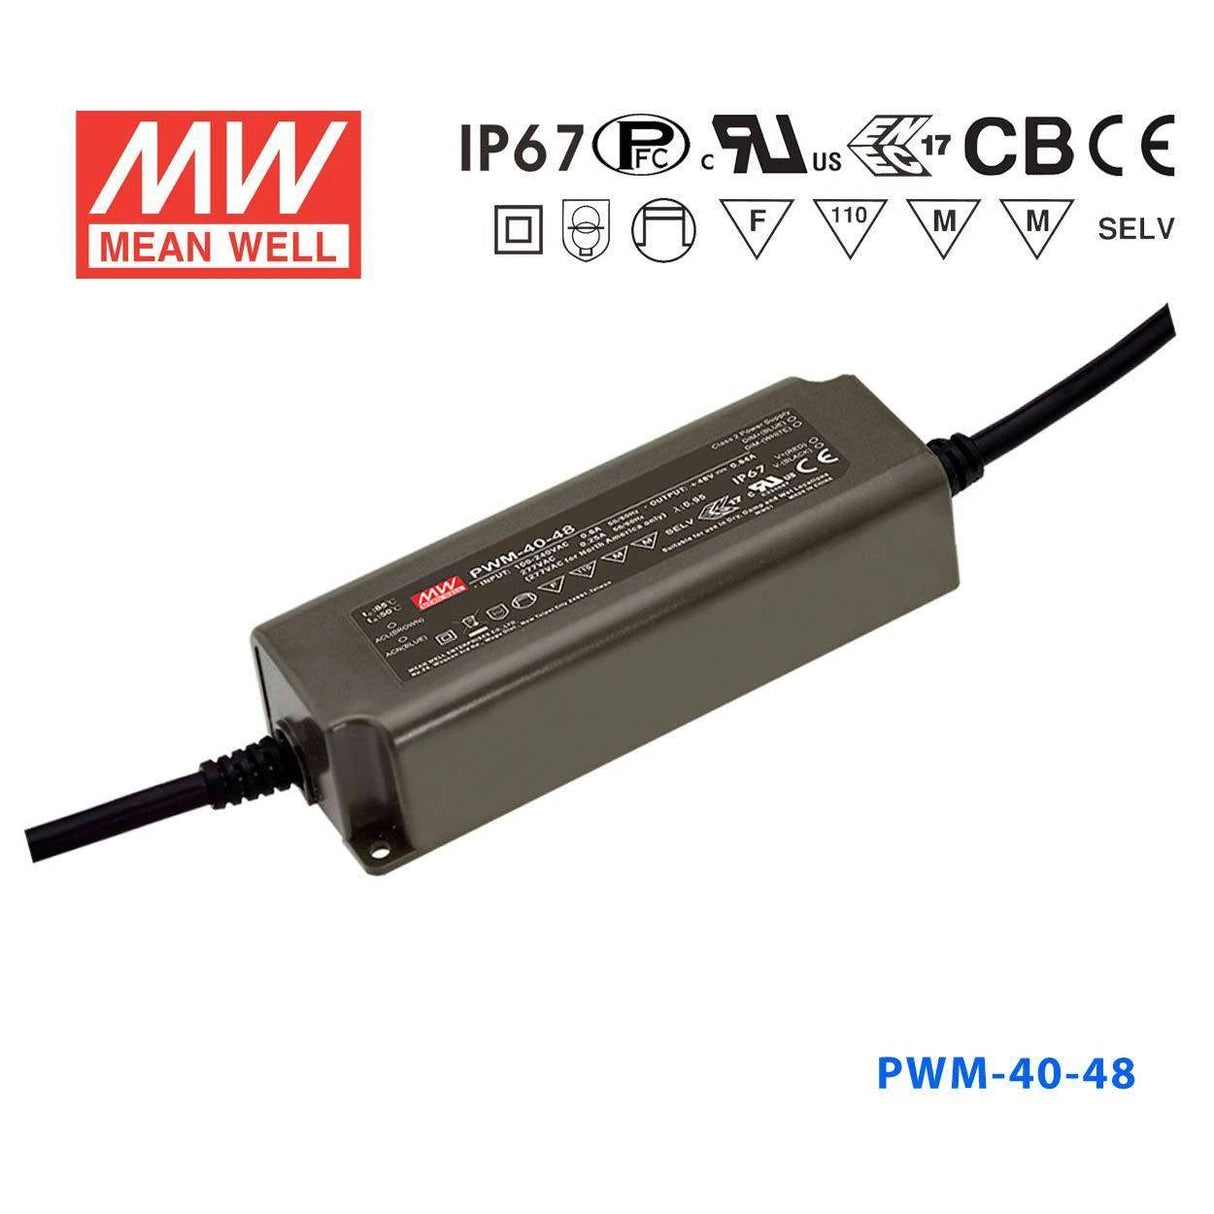 Mean Well PWM-40-48 Power Supply 40W 48V - Dimmable